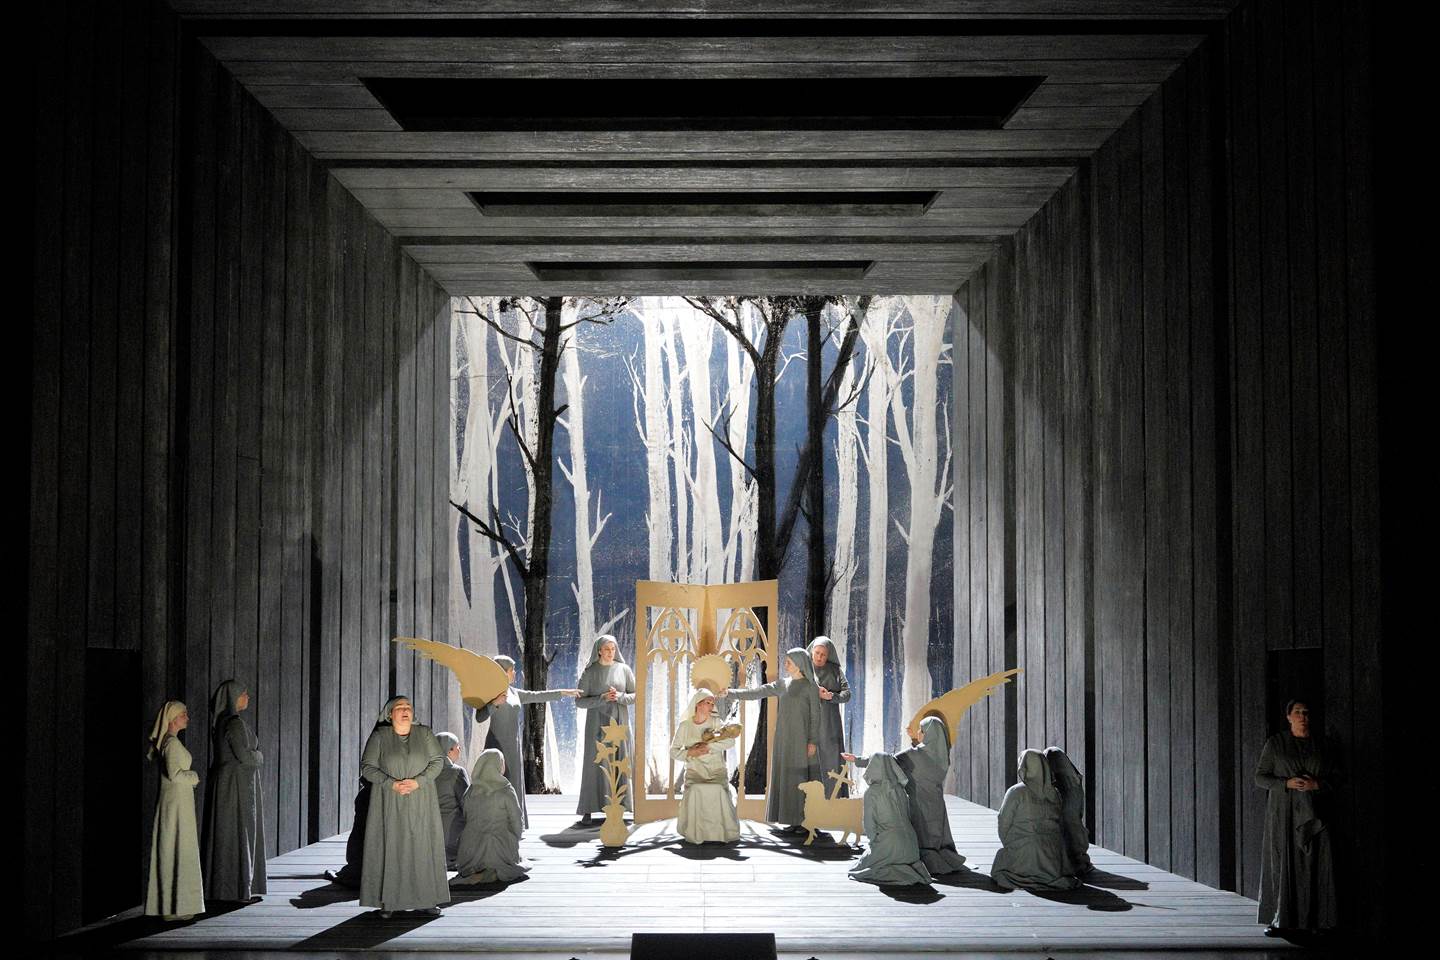 Dialogues of the Carmelites cast on stage